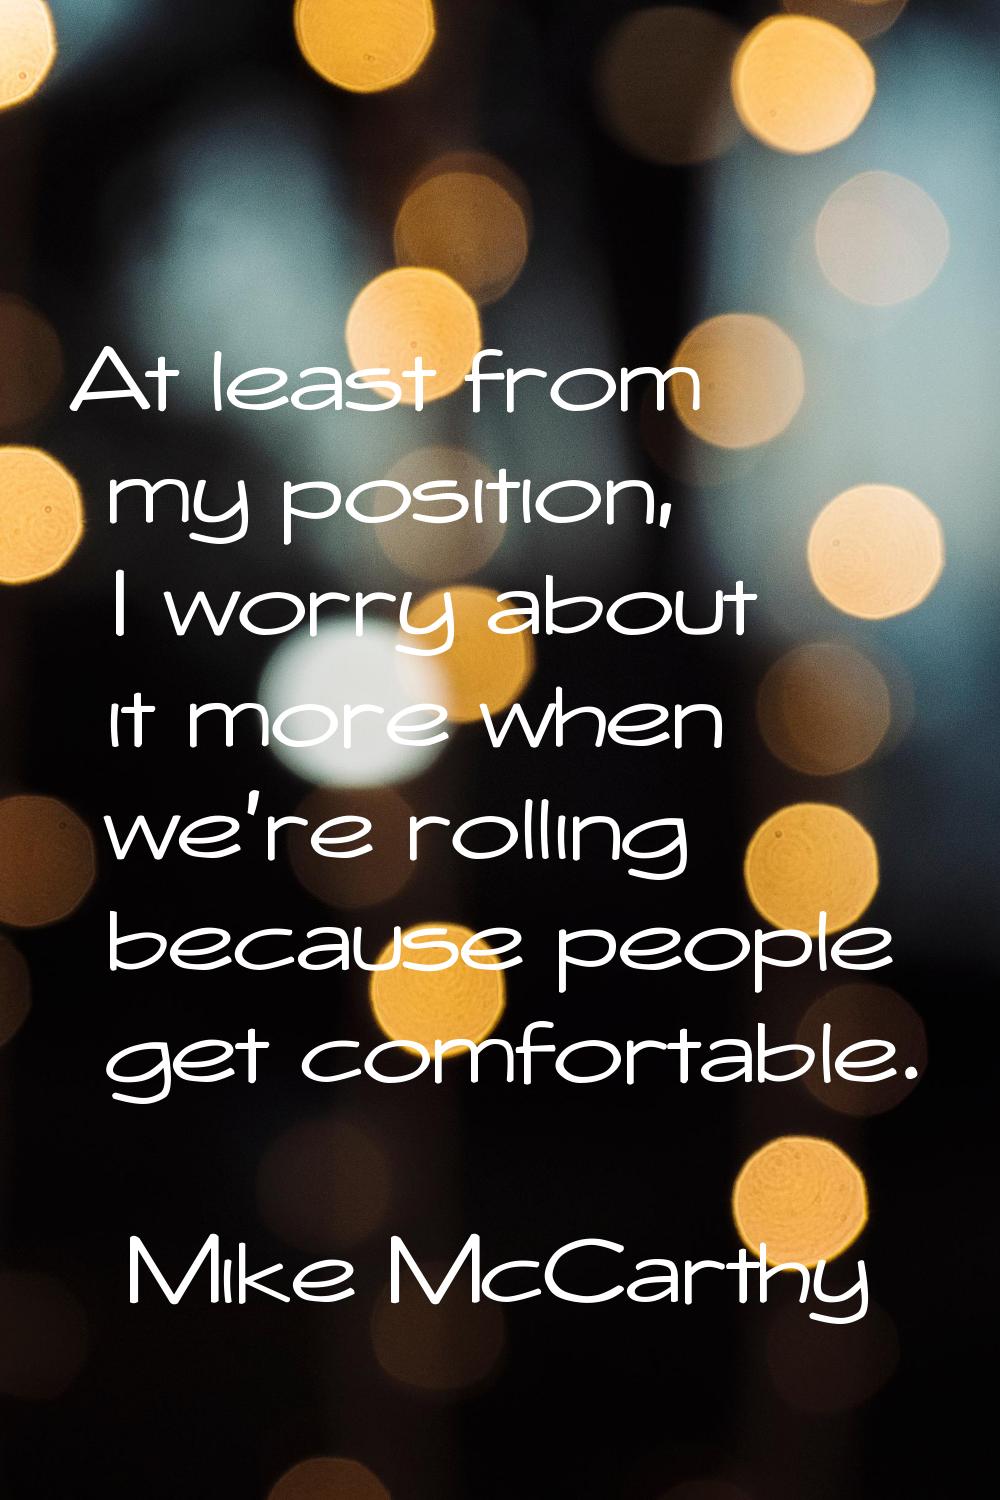 At least from my position, I worry about it more when we're rolling because people get comfortable.